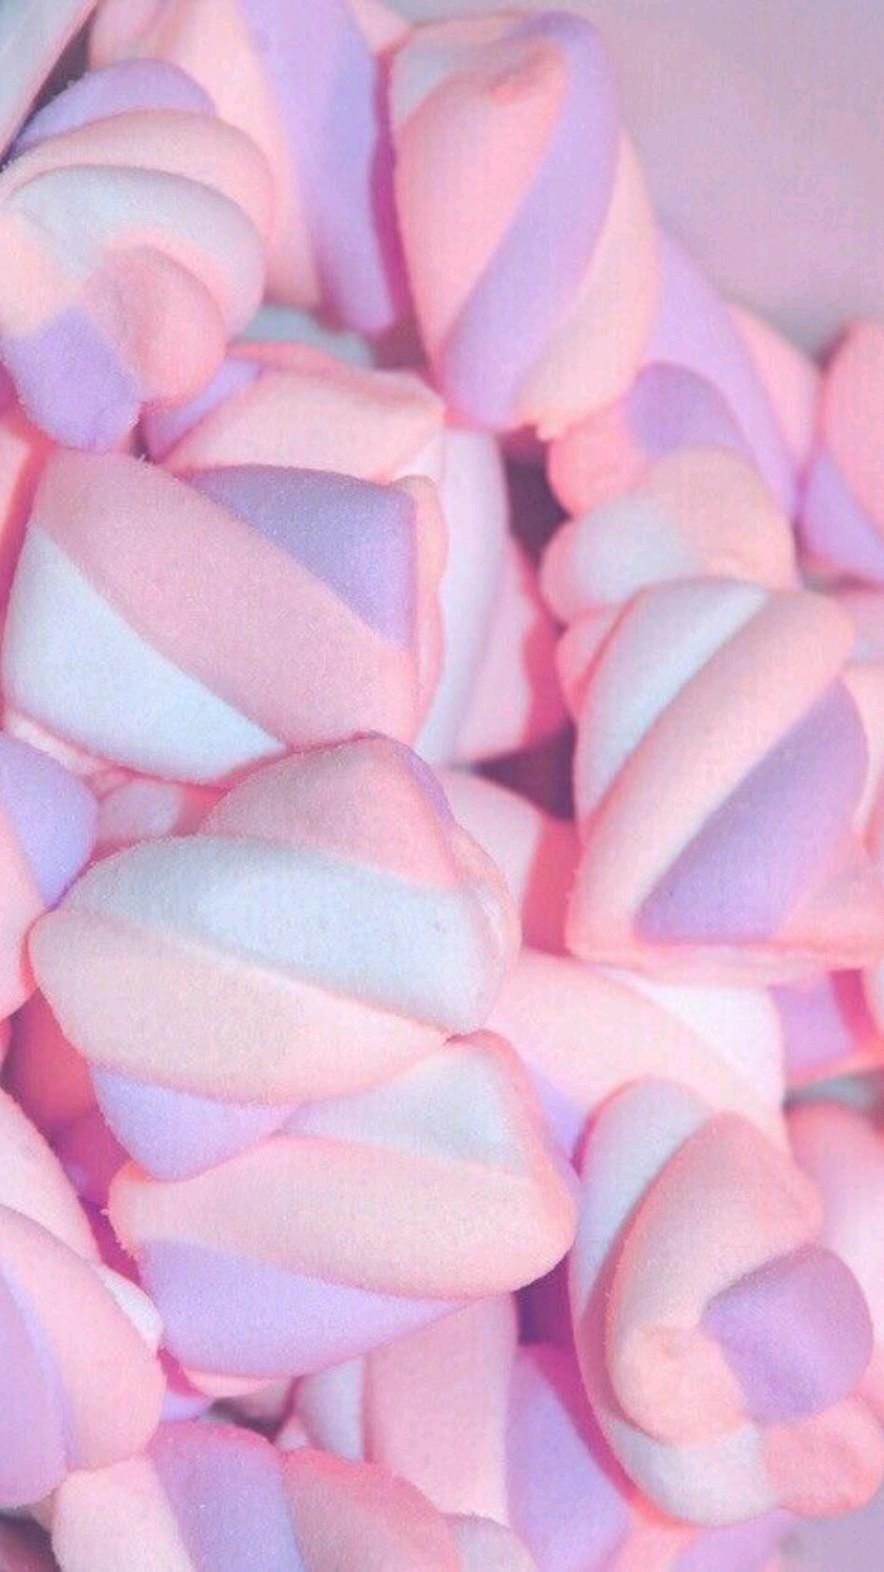 A pile of pink and purple marshmallows - Marshmallows